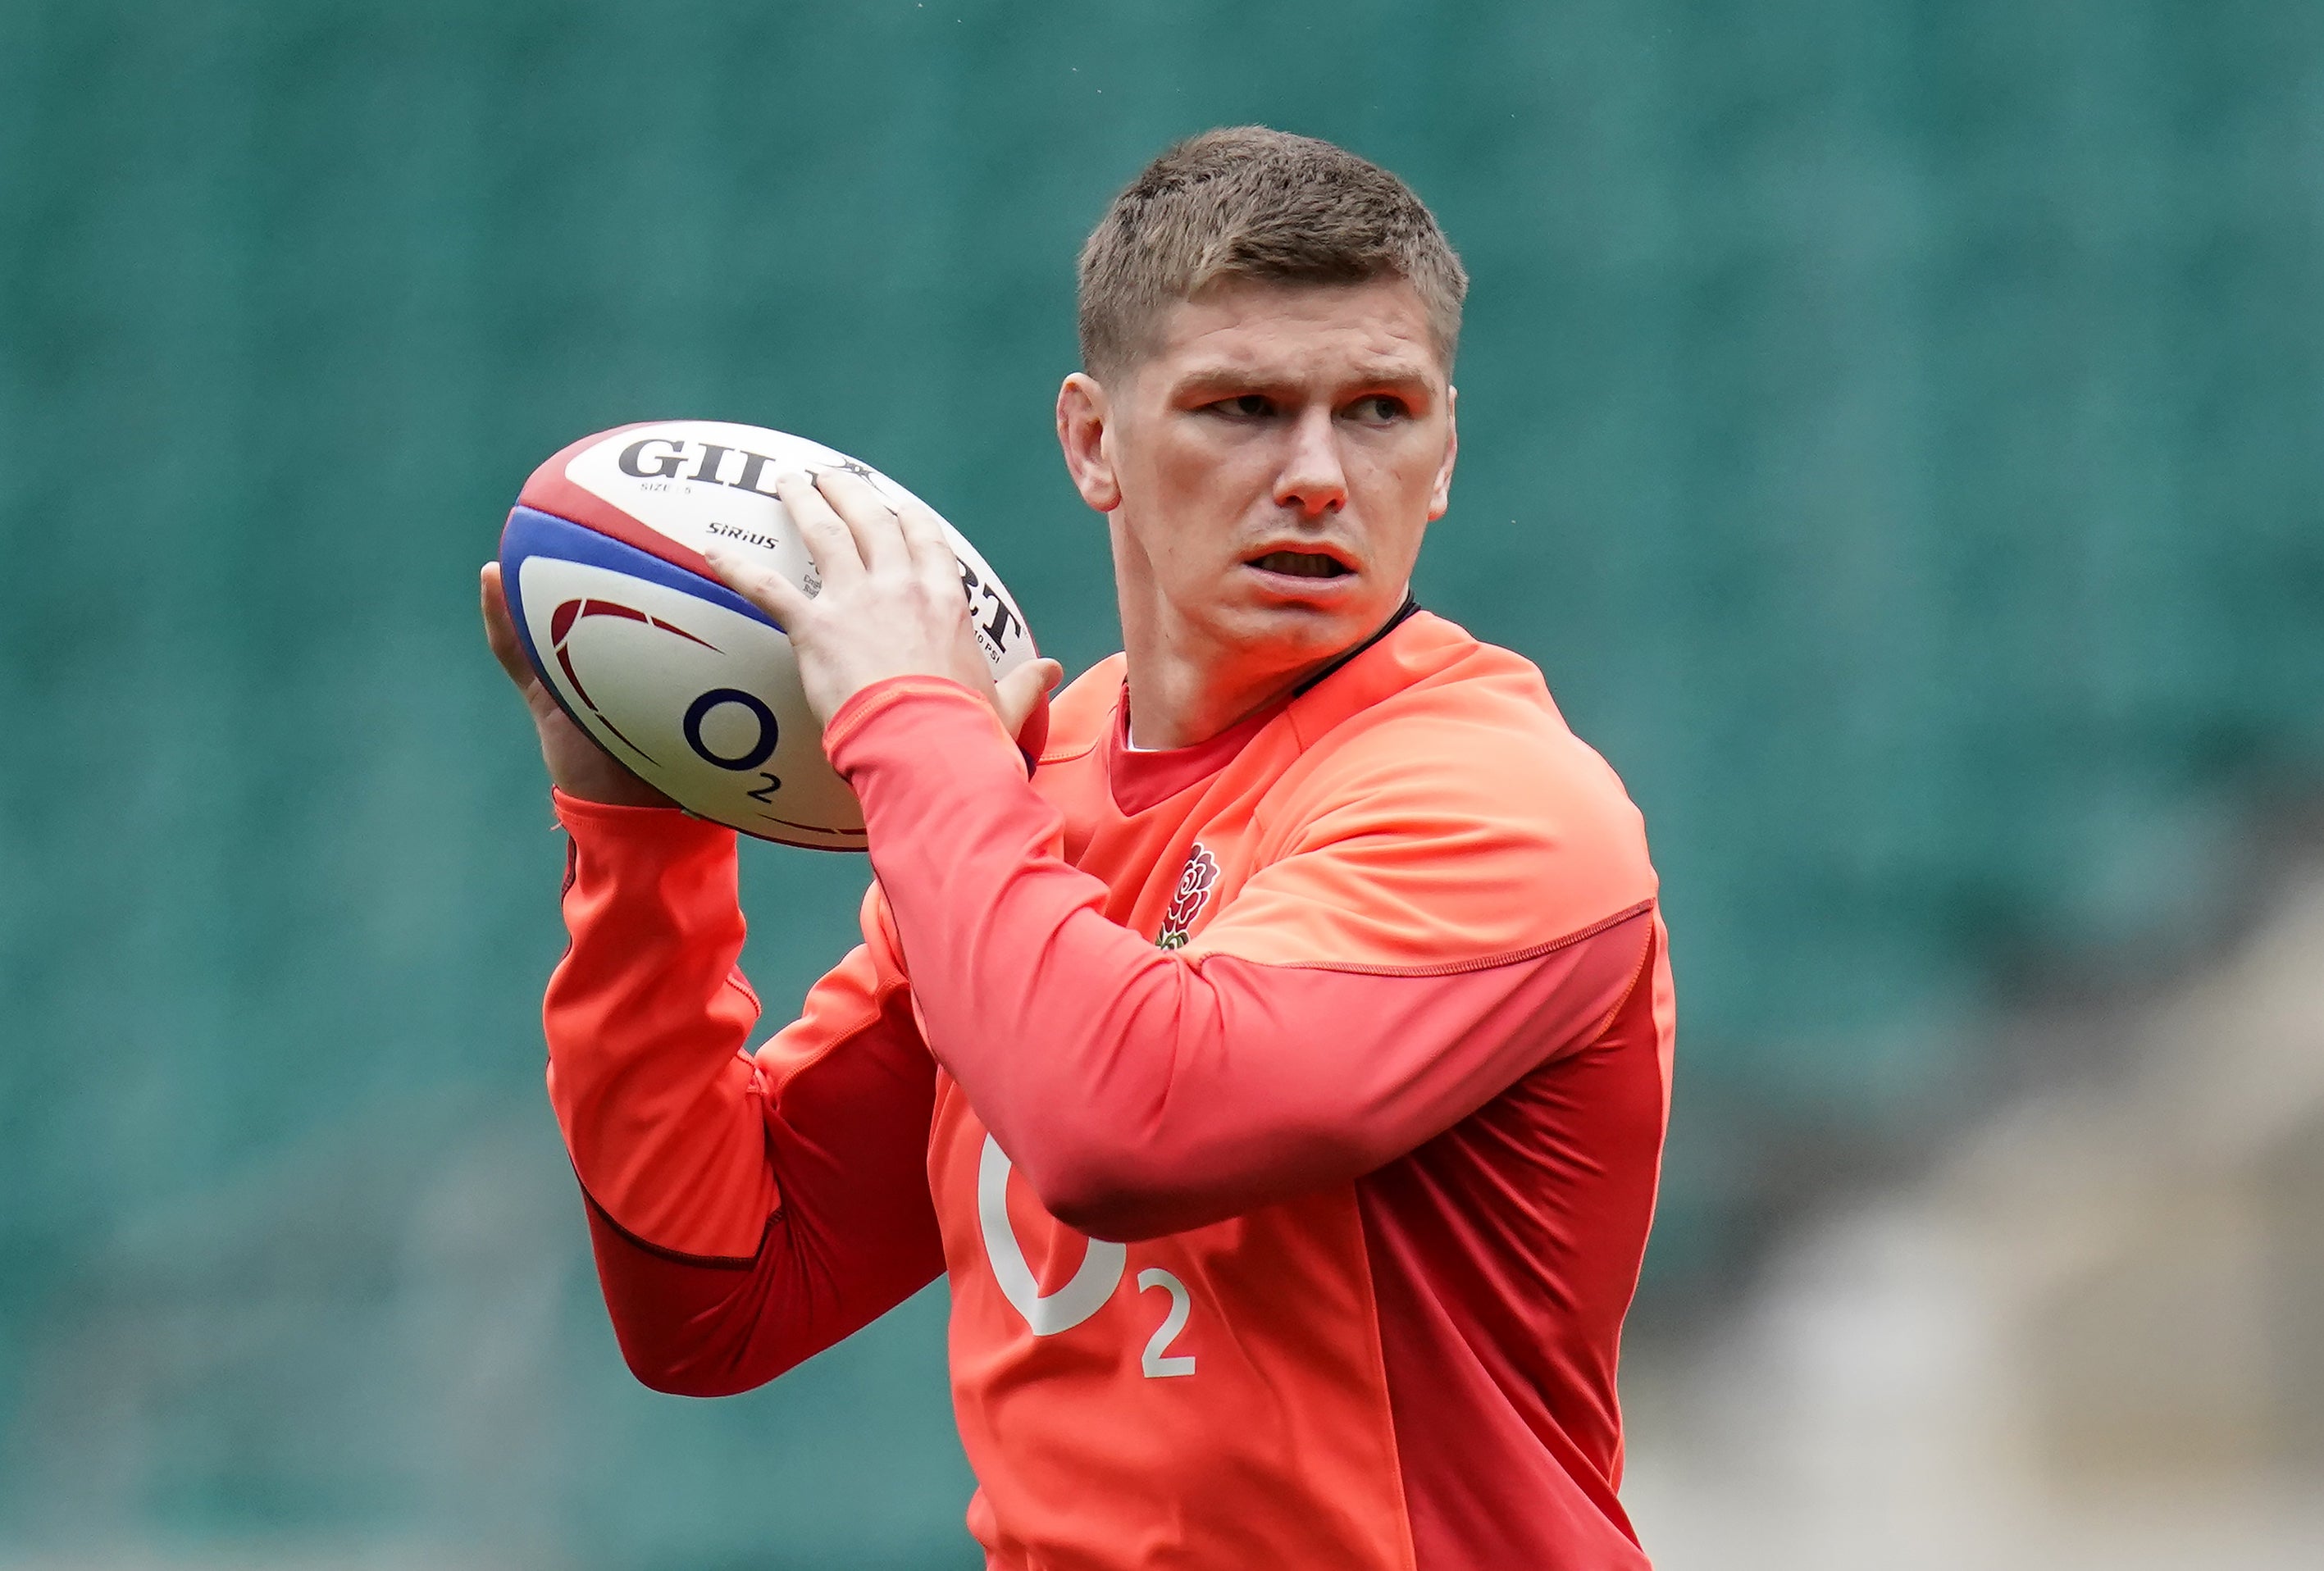 Owen Farrell’s involvement in England’s Six Nations is in doubt after he suffered a fresh injury in training (Andrew Matthews/PA).